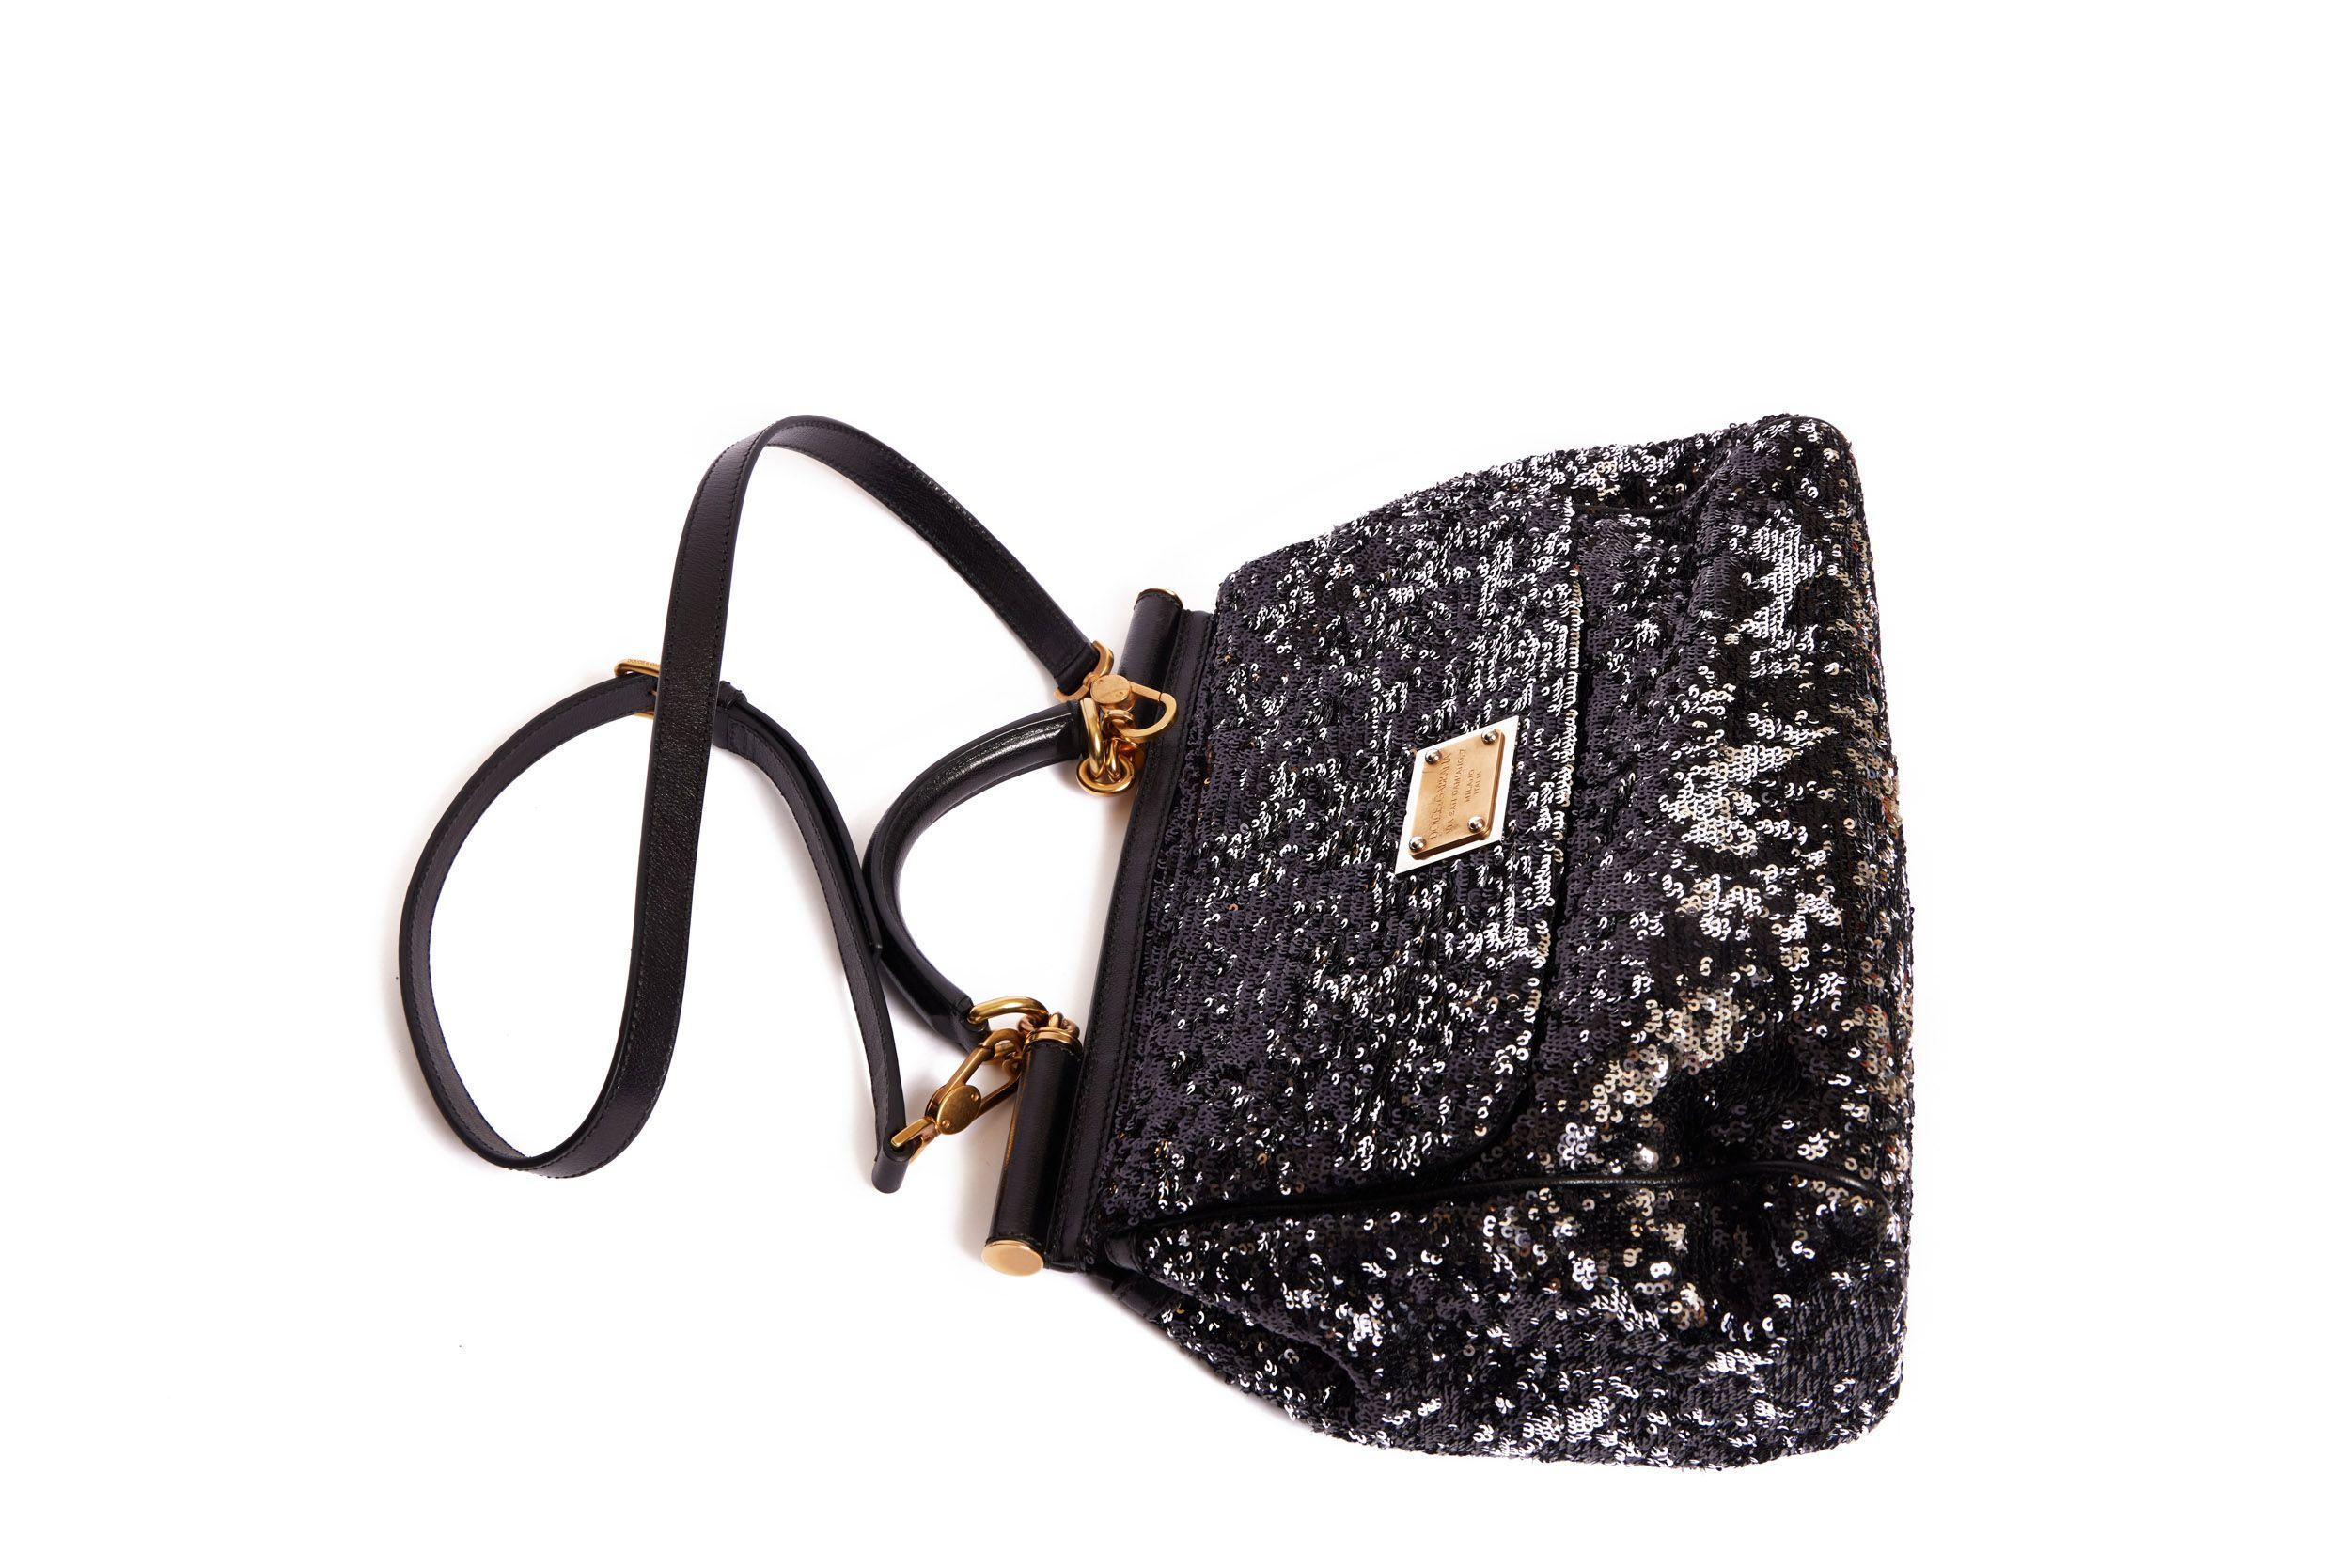 Dolce & Gabbana large Black Sequins Bag In Excellent Condition For Sale In West Hollywood, CA